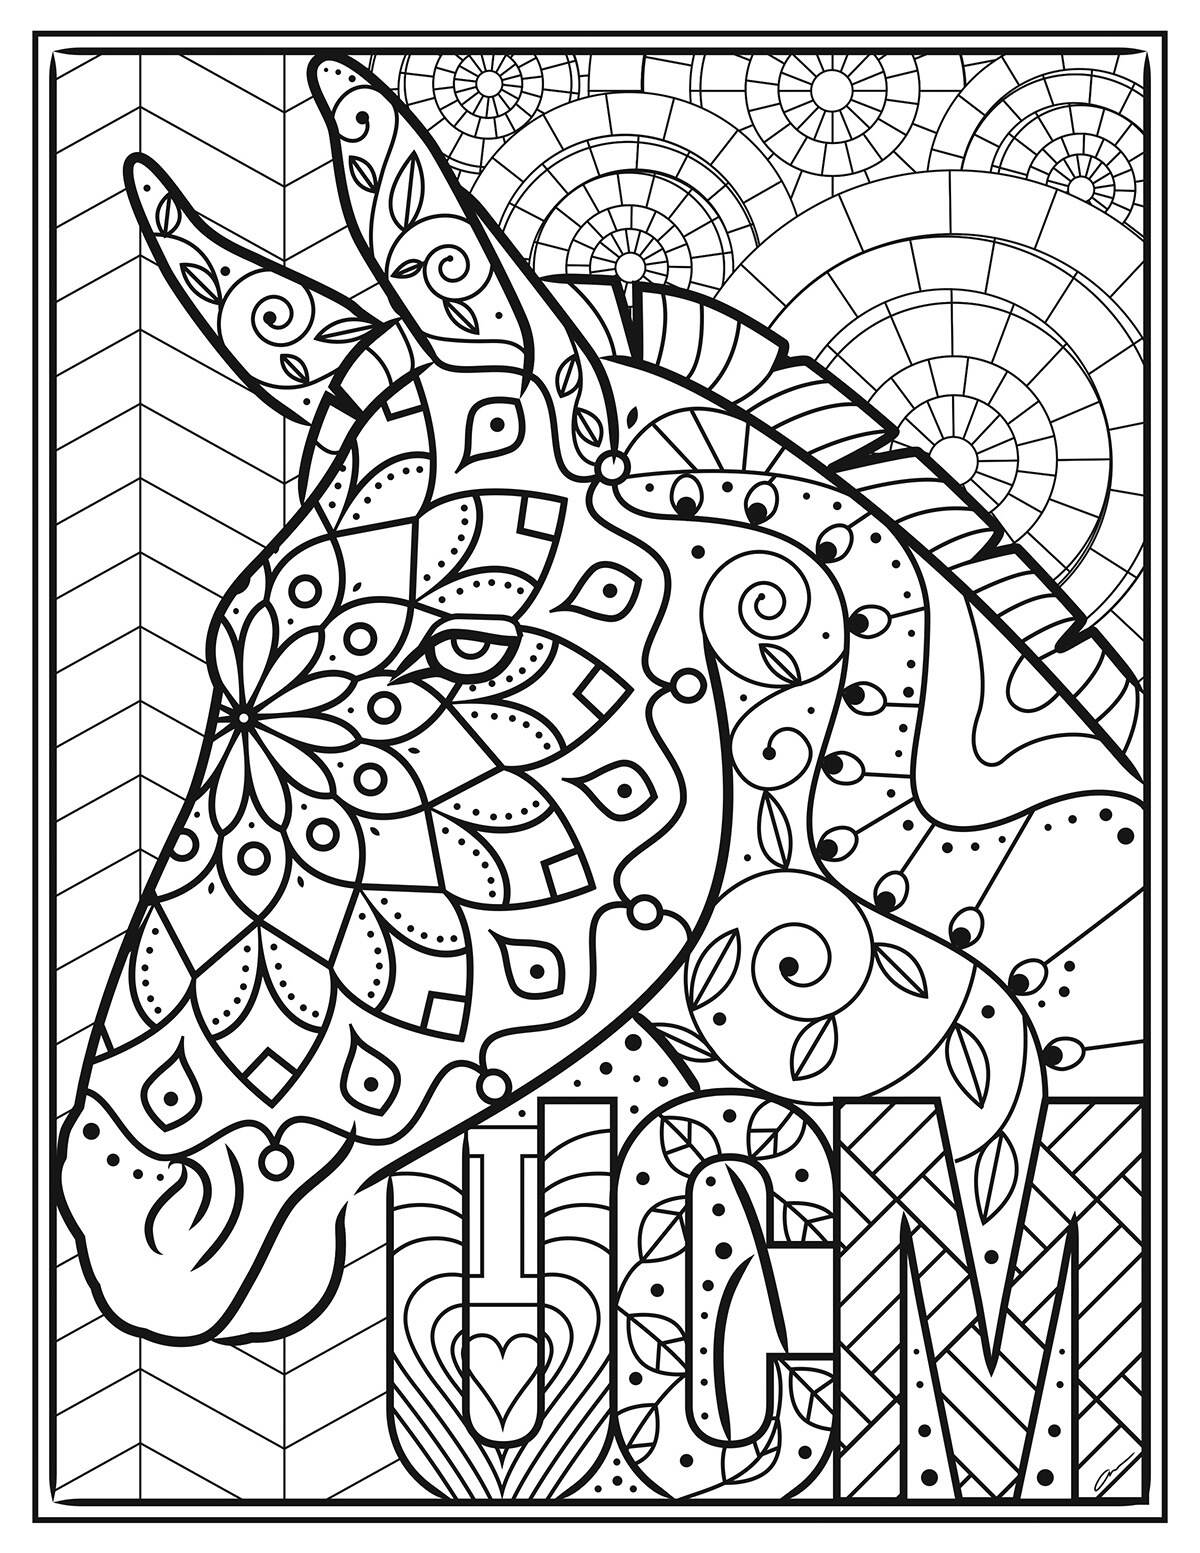 get creative with these advanced ucm themed coloring activities